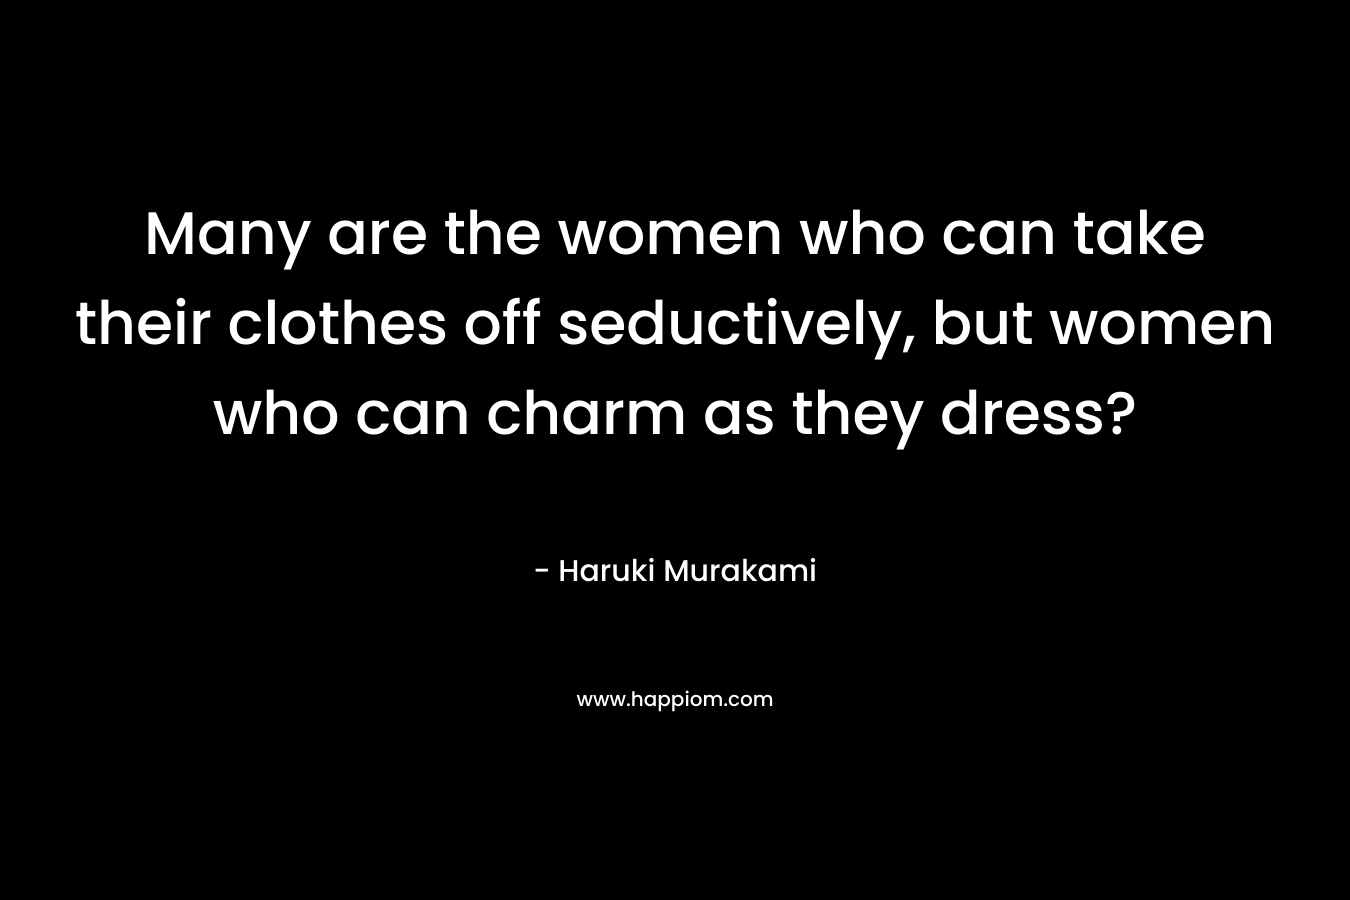 Many are the women who can take their clothes off seductively, but women who can charm as they dress?